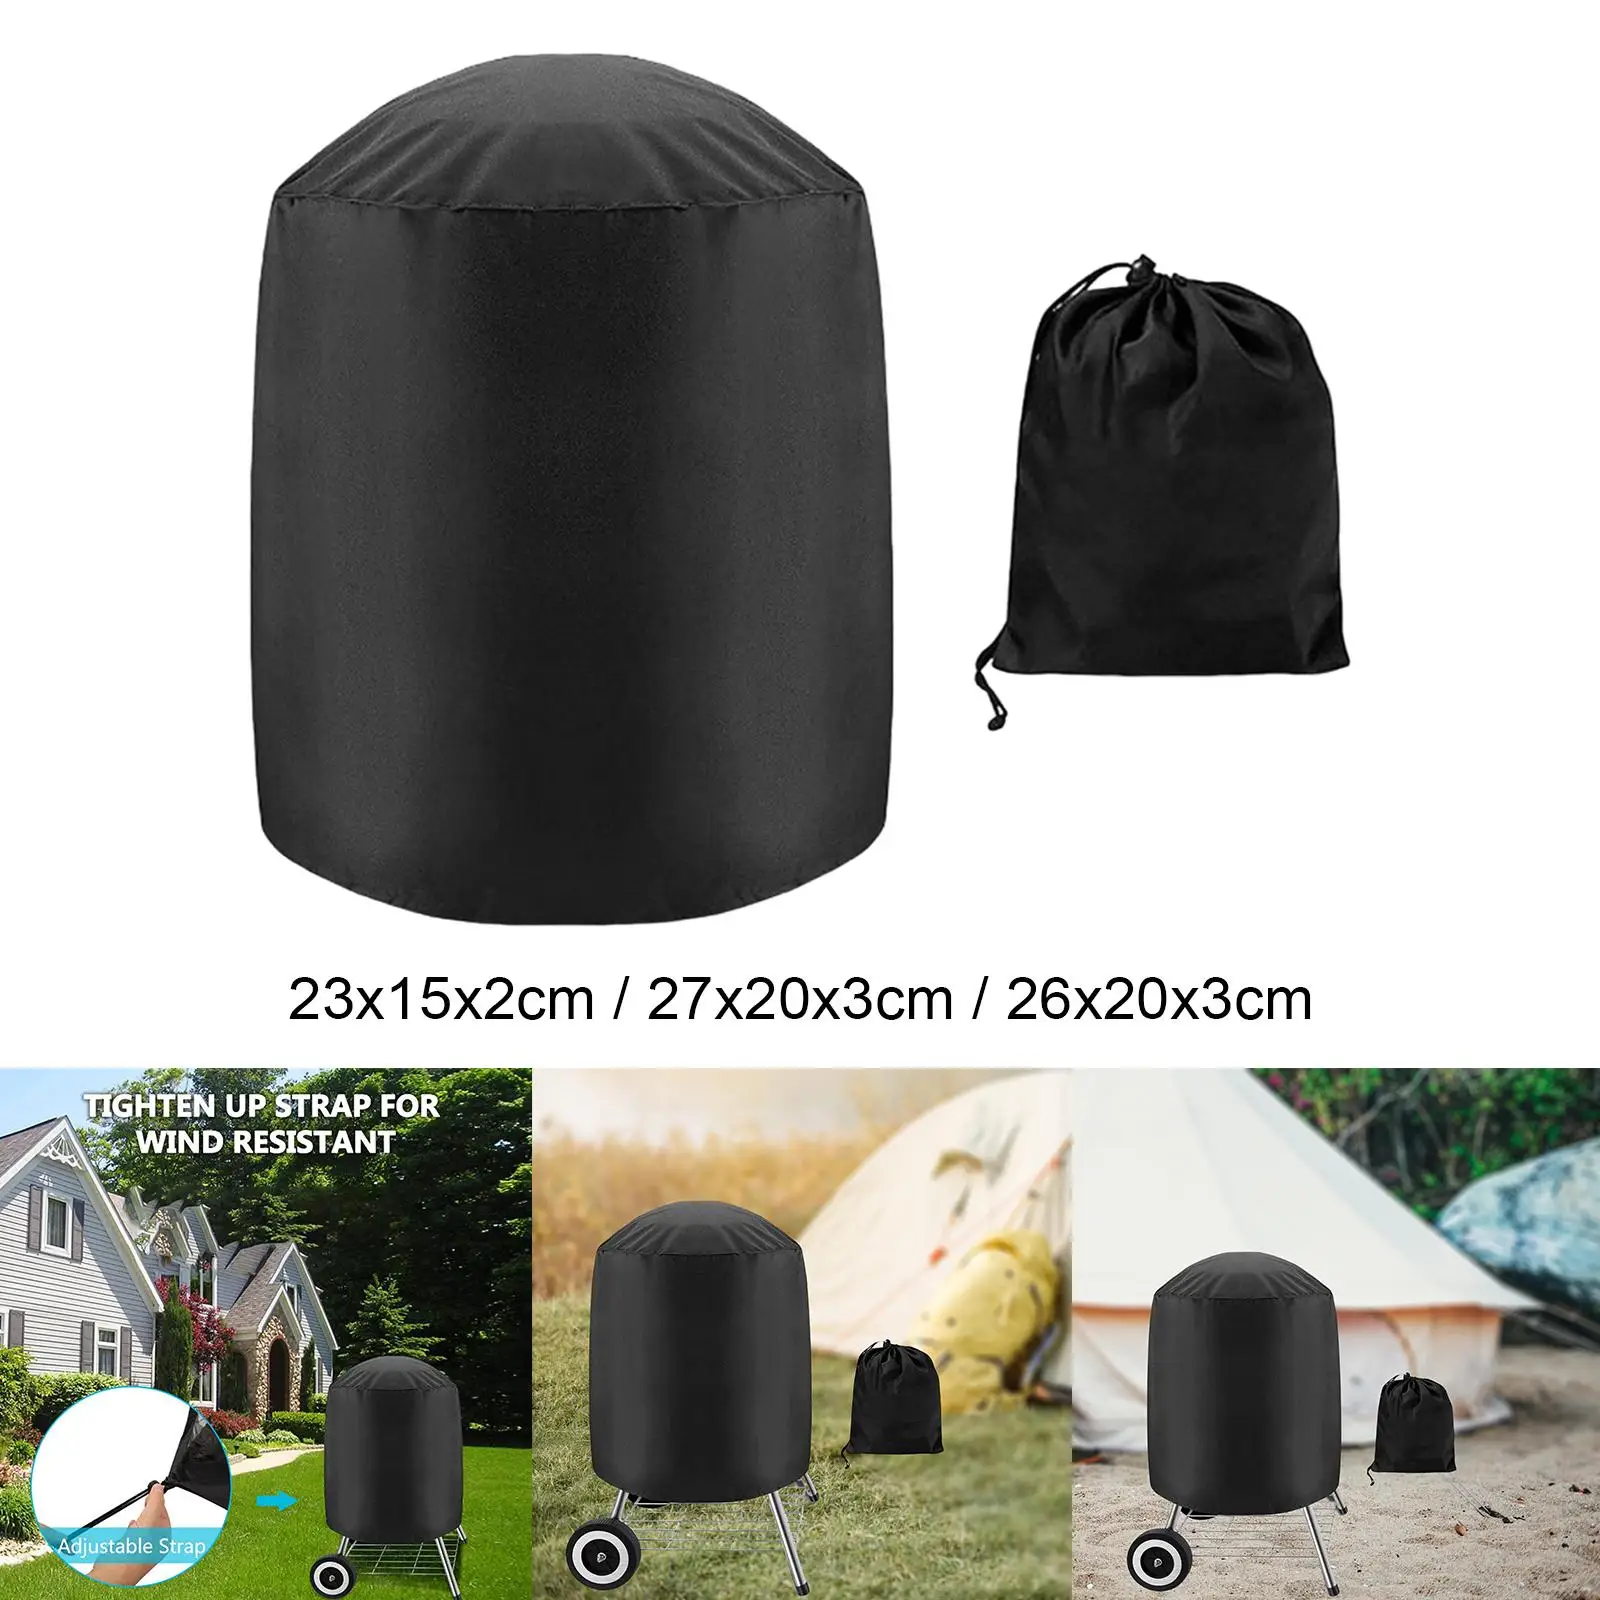 Round Barbecue Grill Cover Folding Windproof Grill Cover Dustproof Waterproof for Barbecue Outdoor Camping